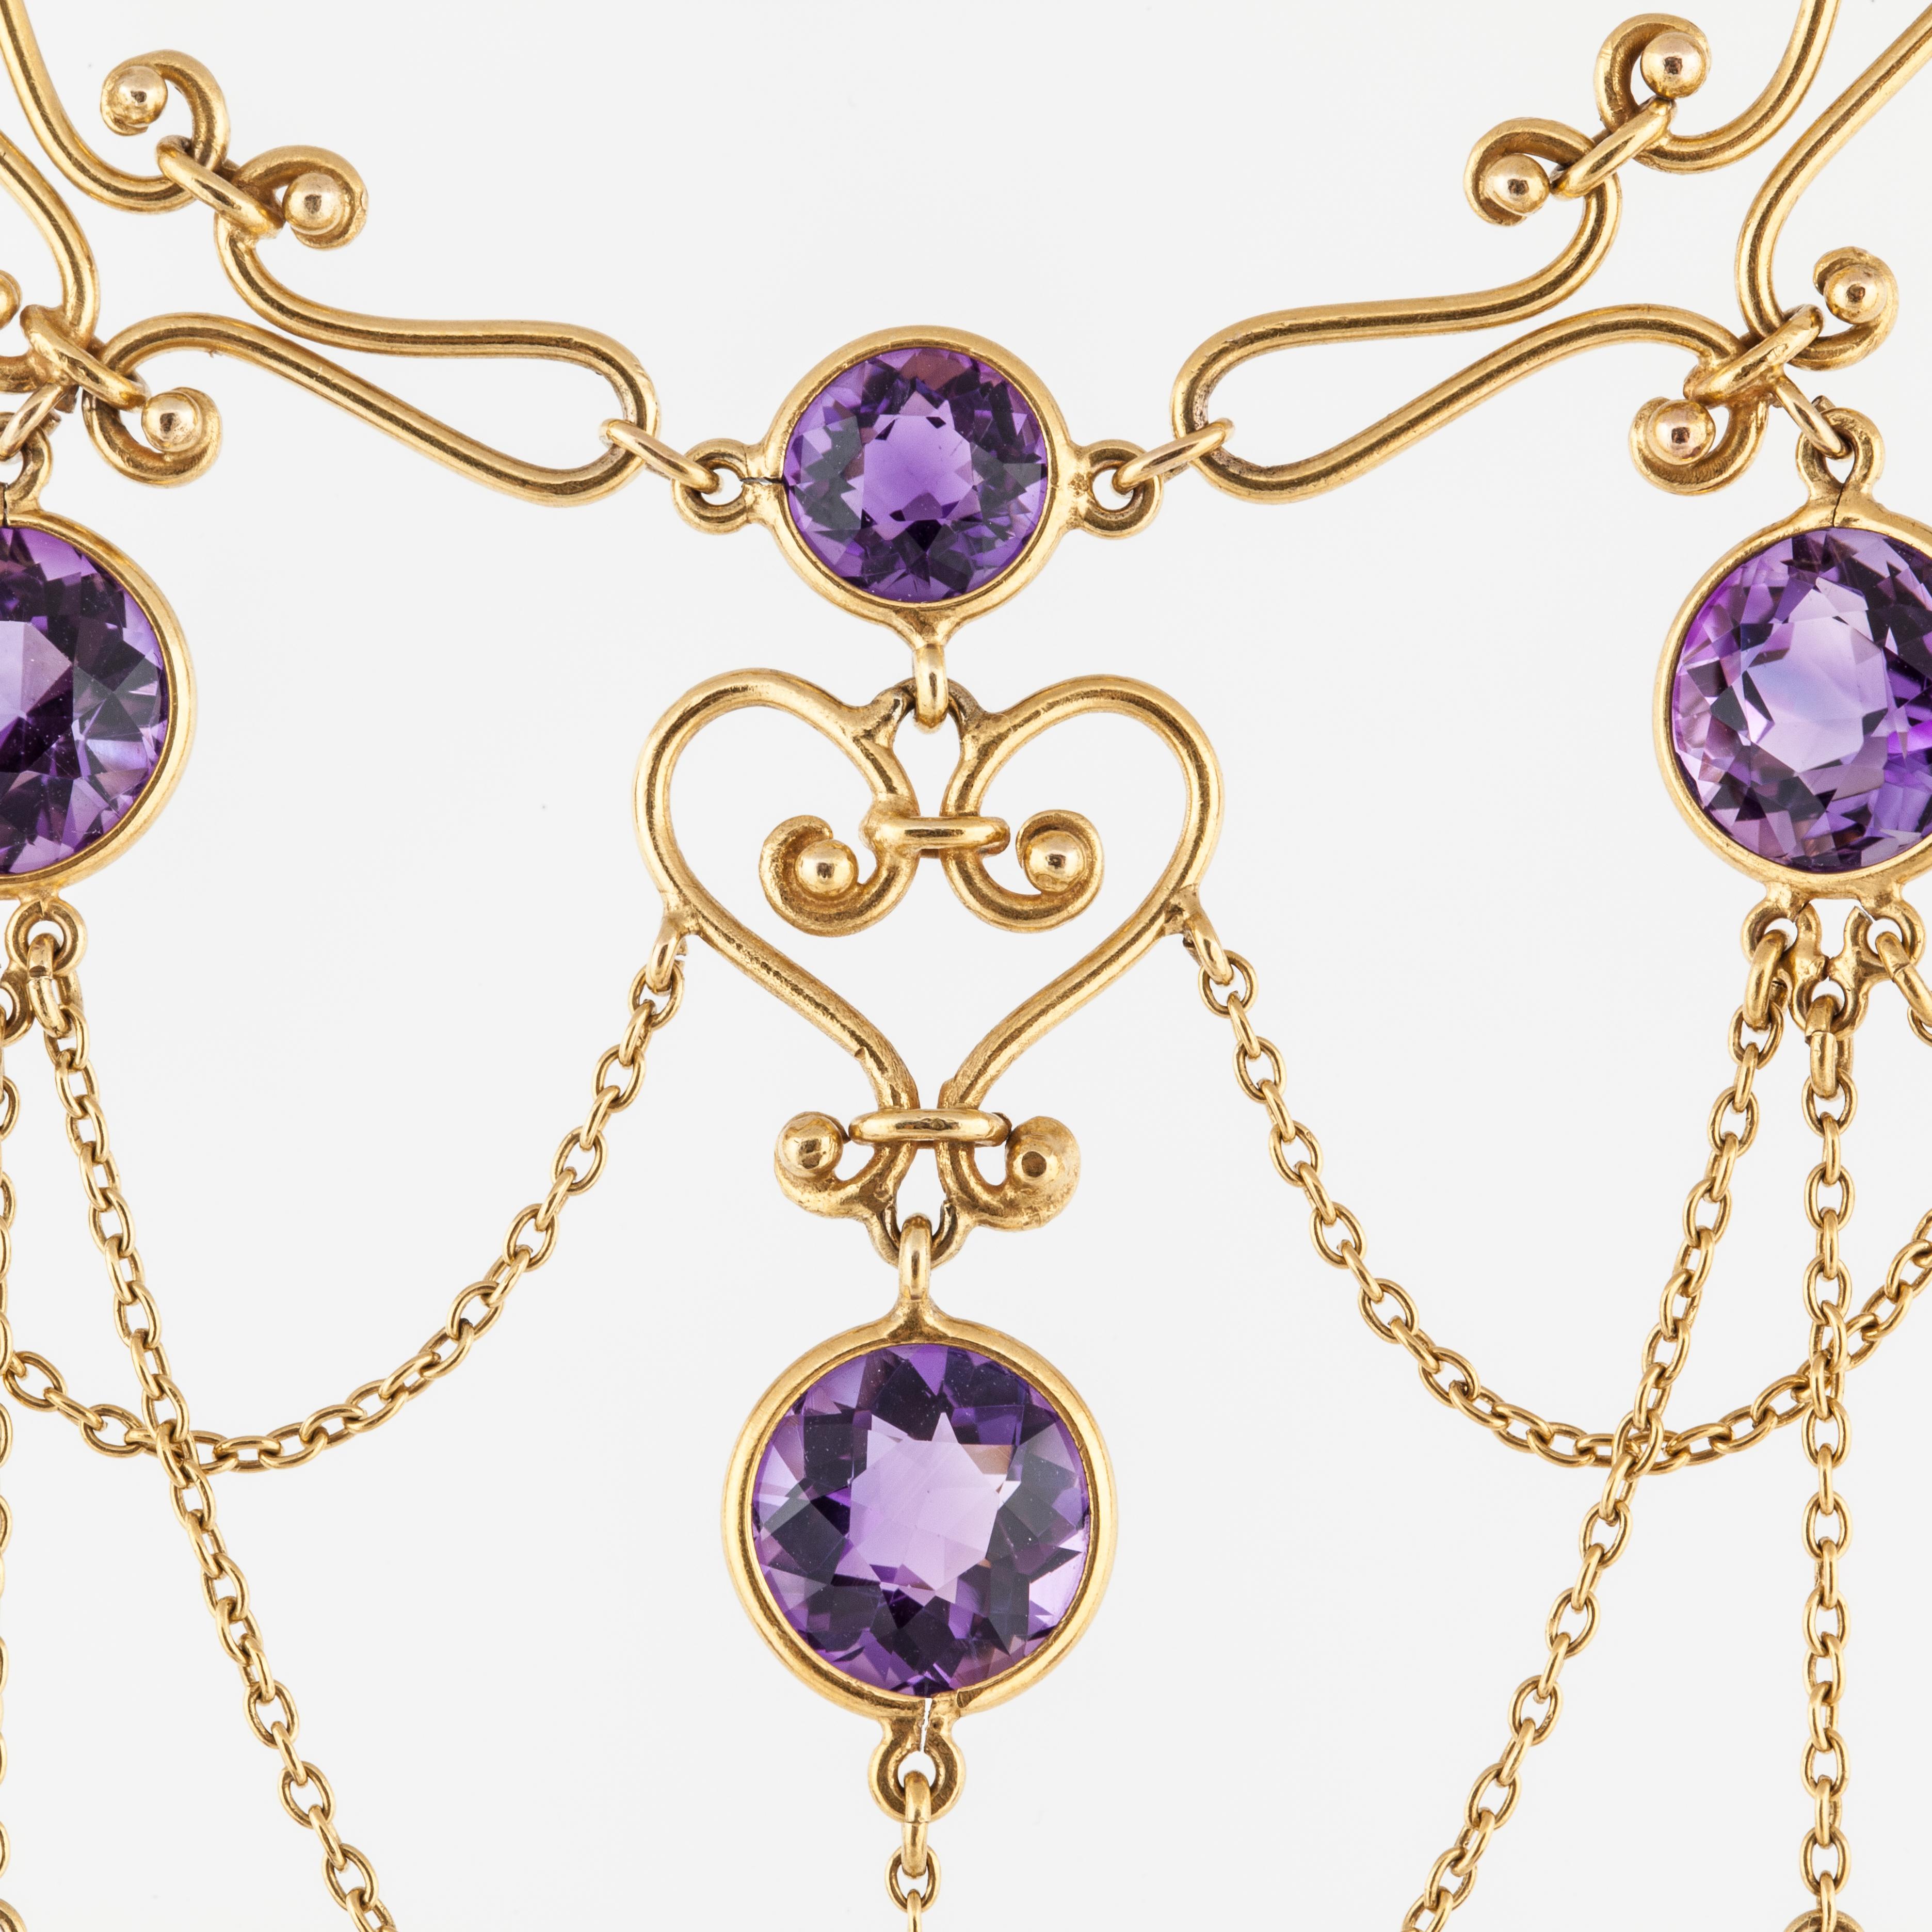 Round Cut Late Victorian Amethyst Swag Necklace in 14K Gold